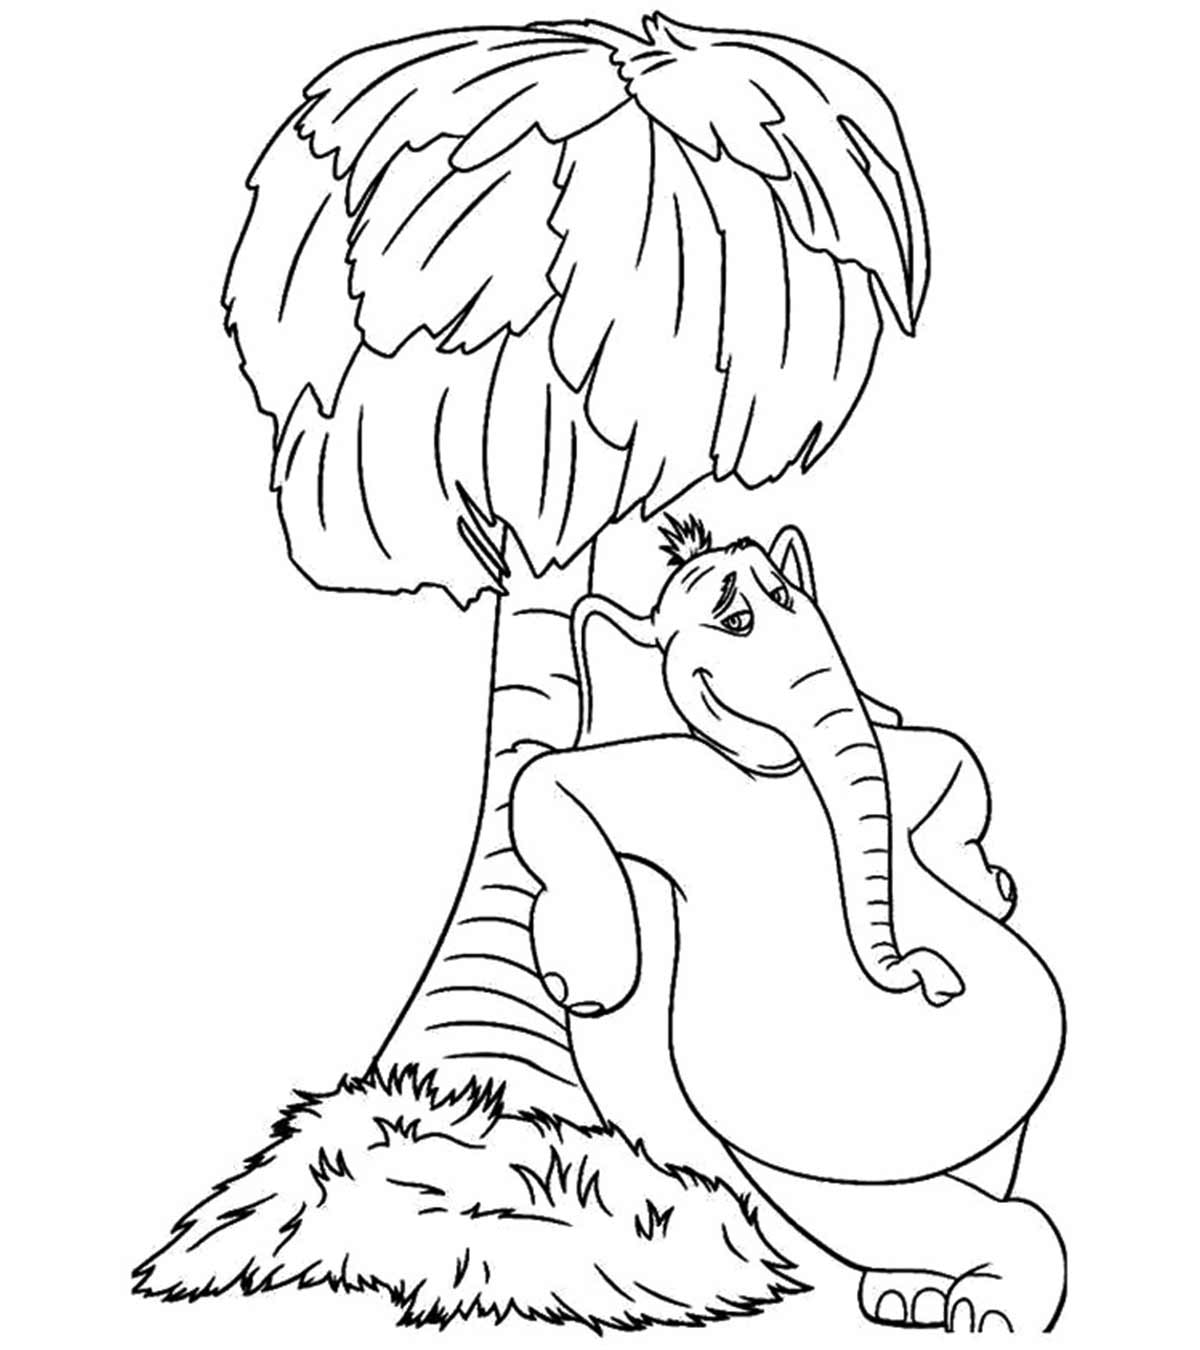 Top 20 Dr. Seuss Coloring Pages For Your Toddler